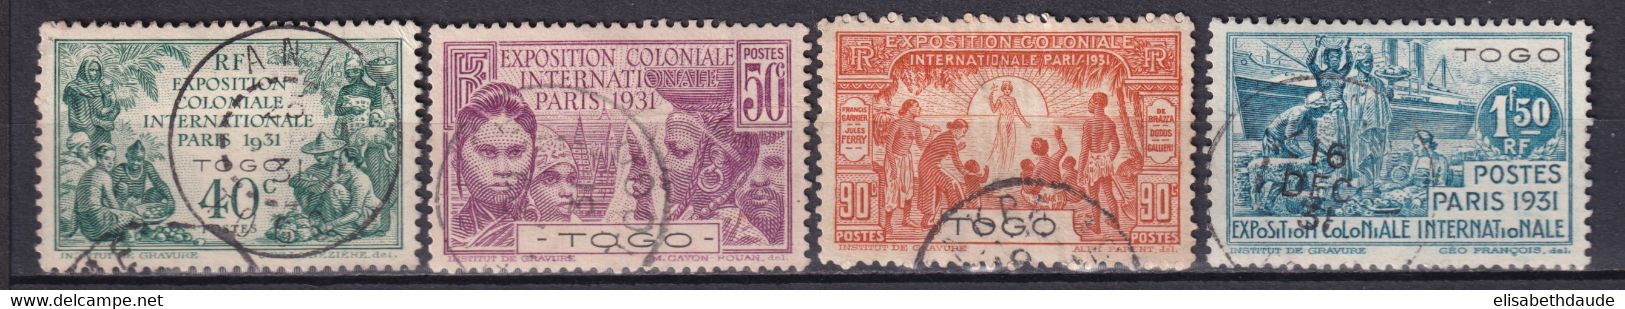 TOGO - 1931 - EXPO 31 YVERT N° 161/164 OBLITERES - COTE = 36 EUR. - Used Stamps